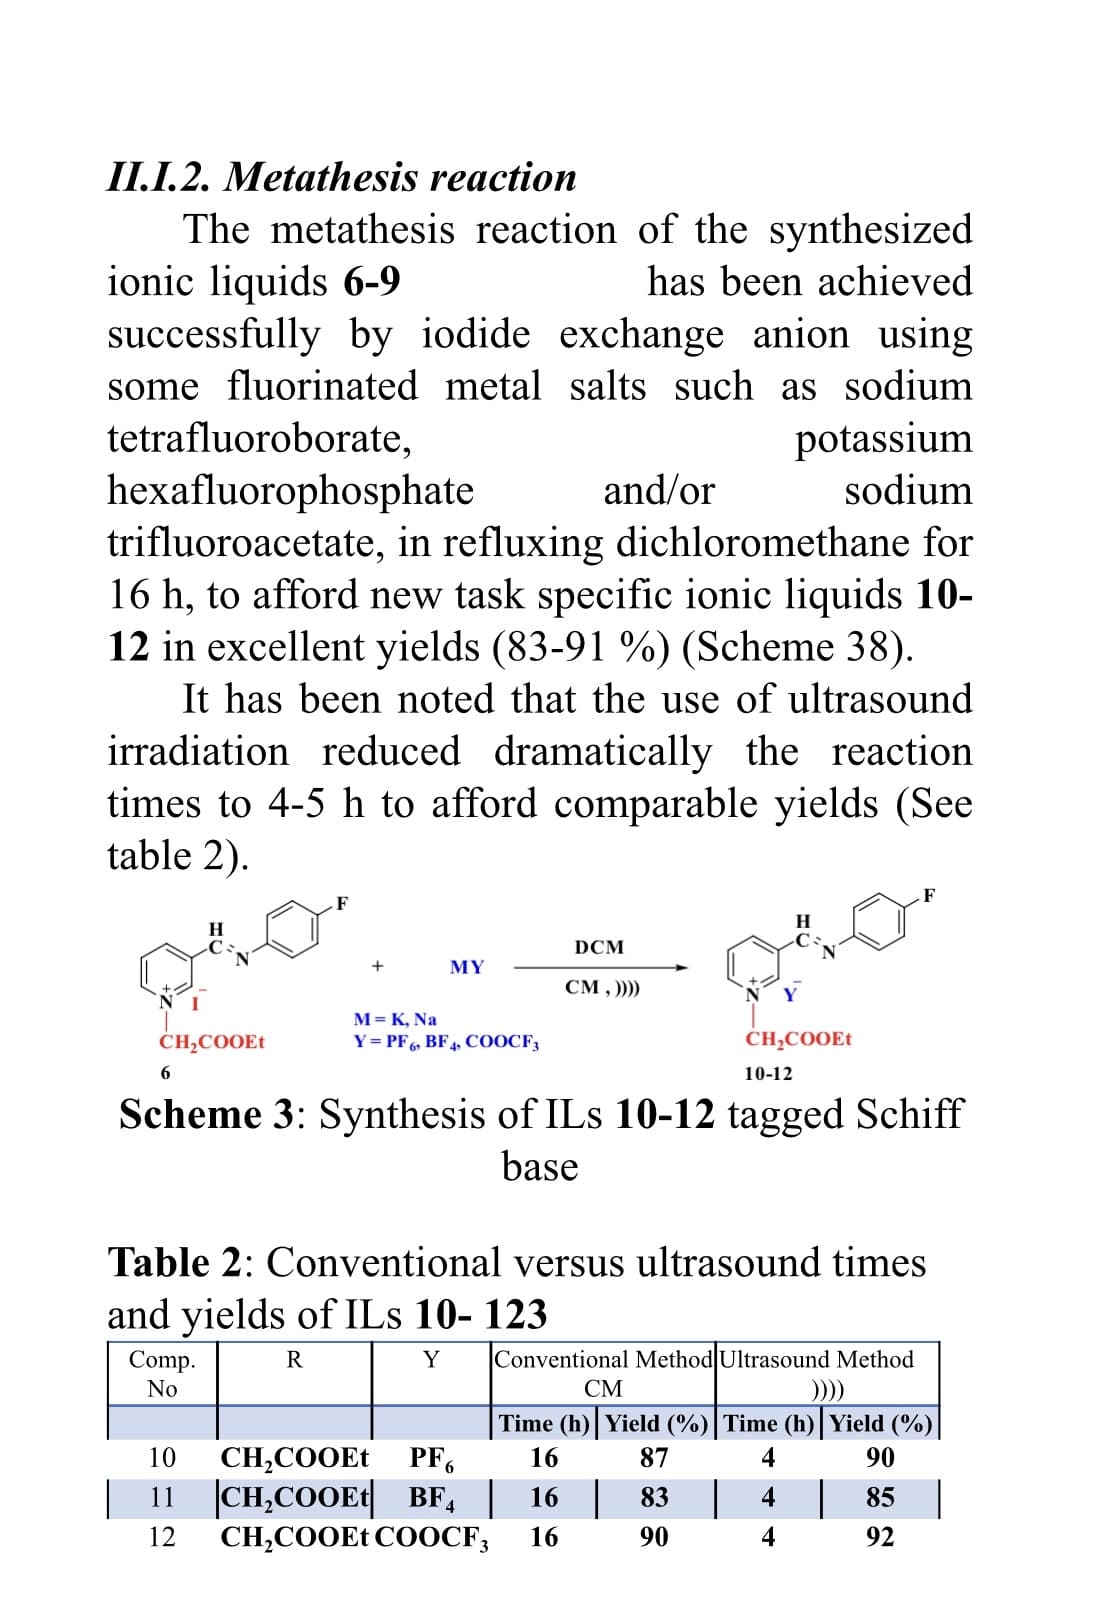 II.I.2. Metathesis reaction
The metathesis reaction of the synthesized
ionic liquids 6-9
successfully by iodide exchange anion using
some fluorinated metal salts such as sodium
has been achieved
potassium
sodium
tetrafluoroborate,
hexafluorophosphate
trifluoroacetate, in refluxing dichloromethane for
16 h, to afford new task specific ionic liquids 10-
12 in excellent yields (83-91 %) (Scheme 38).
It has been noted that the use of ultrasound
irradiation reduced dramatically the reaction
times to 4-5 h to afford comparable yields (See
table 2).
and/or
F
F
DCM
+
MY
CM , )))
M= K, Na
Y= PF6, BF4, COOCF3
CH;COOEt
CH;COOE1
6
10-12
Scheme 3: Synthesis of ILs 10-12 tagged Schiff
base
Table 2: Conventional versus ultrasound times
and yields of ILs 10- 123
Conventional Method Ultrasound Method
Comp.
No
R
Y
СМ
)))
Time (h) Yield (%)|Time (h) Yield (%)
10
PF6
CH,COOET
11 |CH,COOE1| BF, | 16
CH,COOE1 COOCF;
16
87
4
90
83
4
85 |
12
16
90
92
